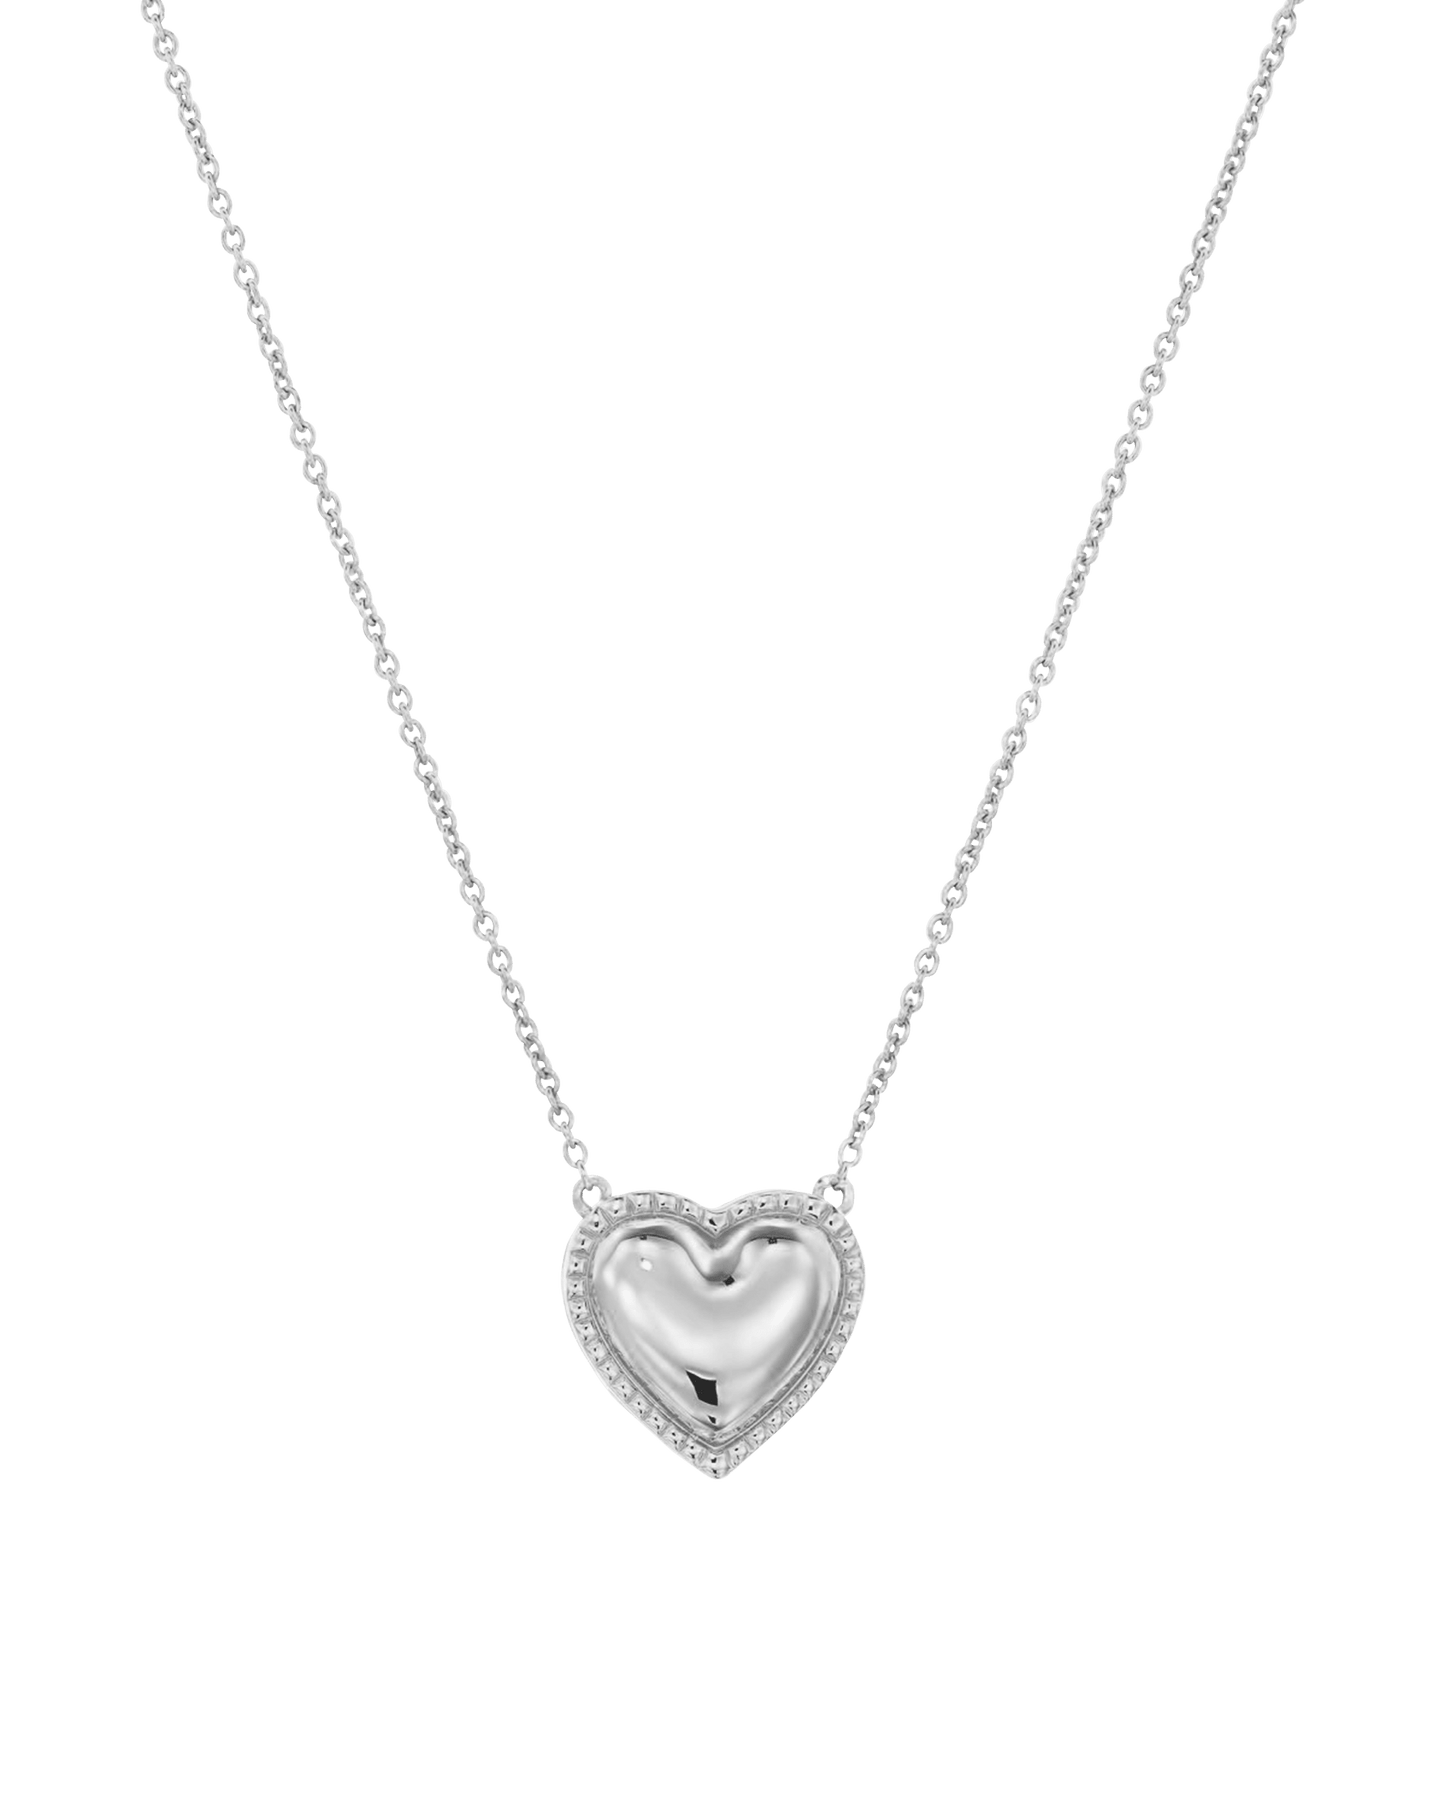 Heart Pendant Necklace - 925 Sterling Silver Necklaces magal-dev 16" (Most Popular) 